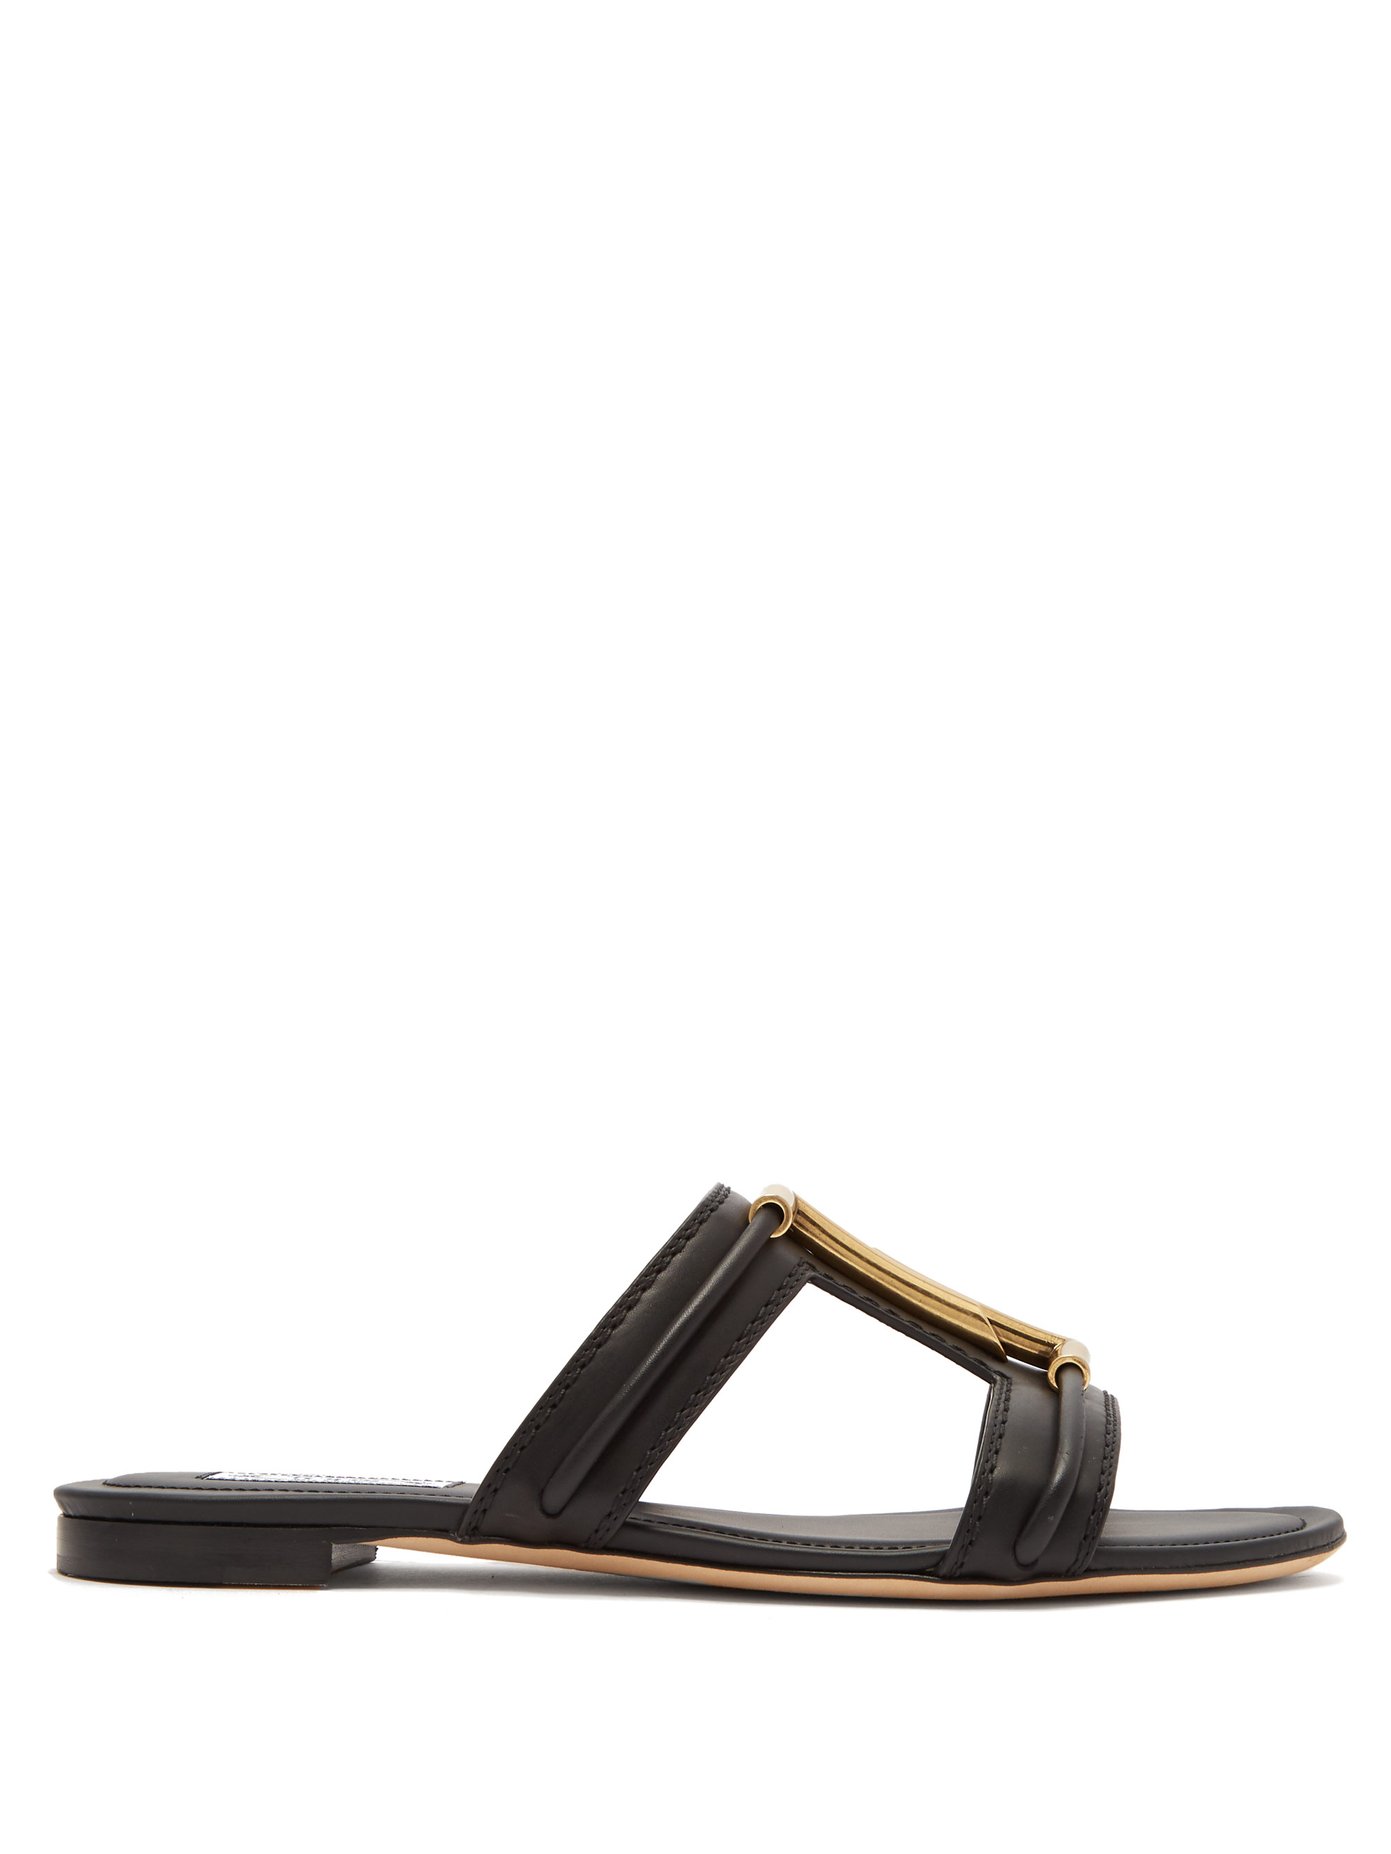 Double T-bar leather slides | Tod's 